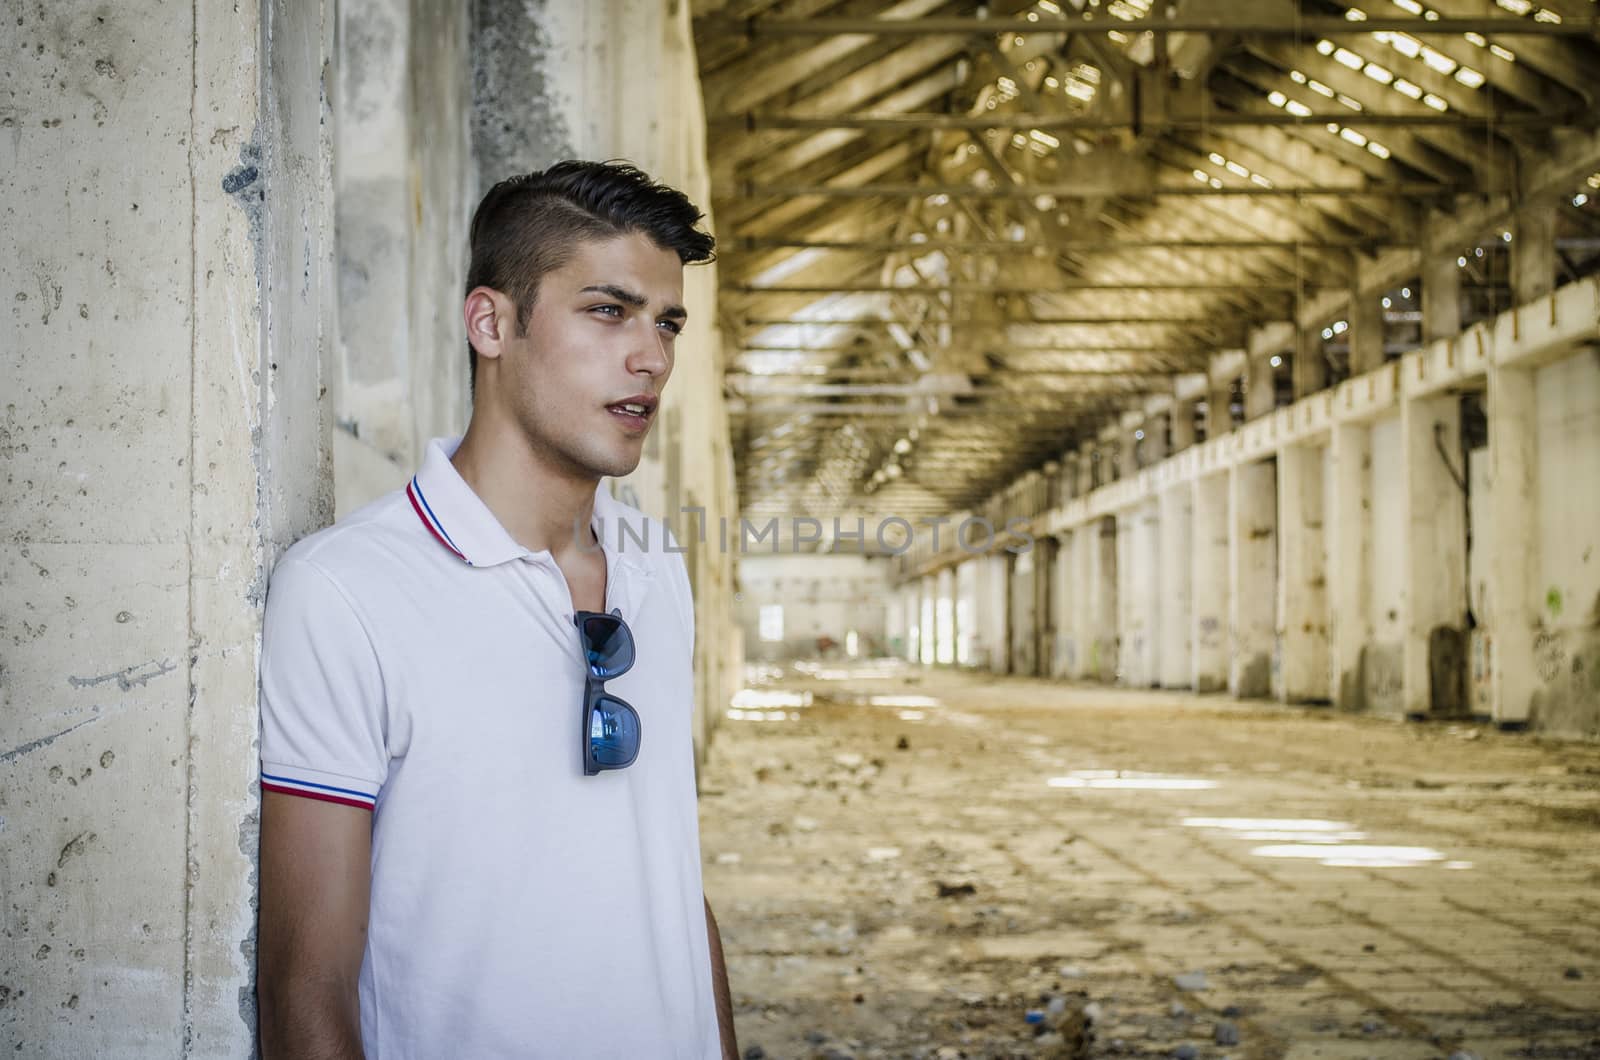 Handsome young man in abandoned, empty warehouse or old factory